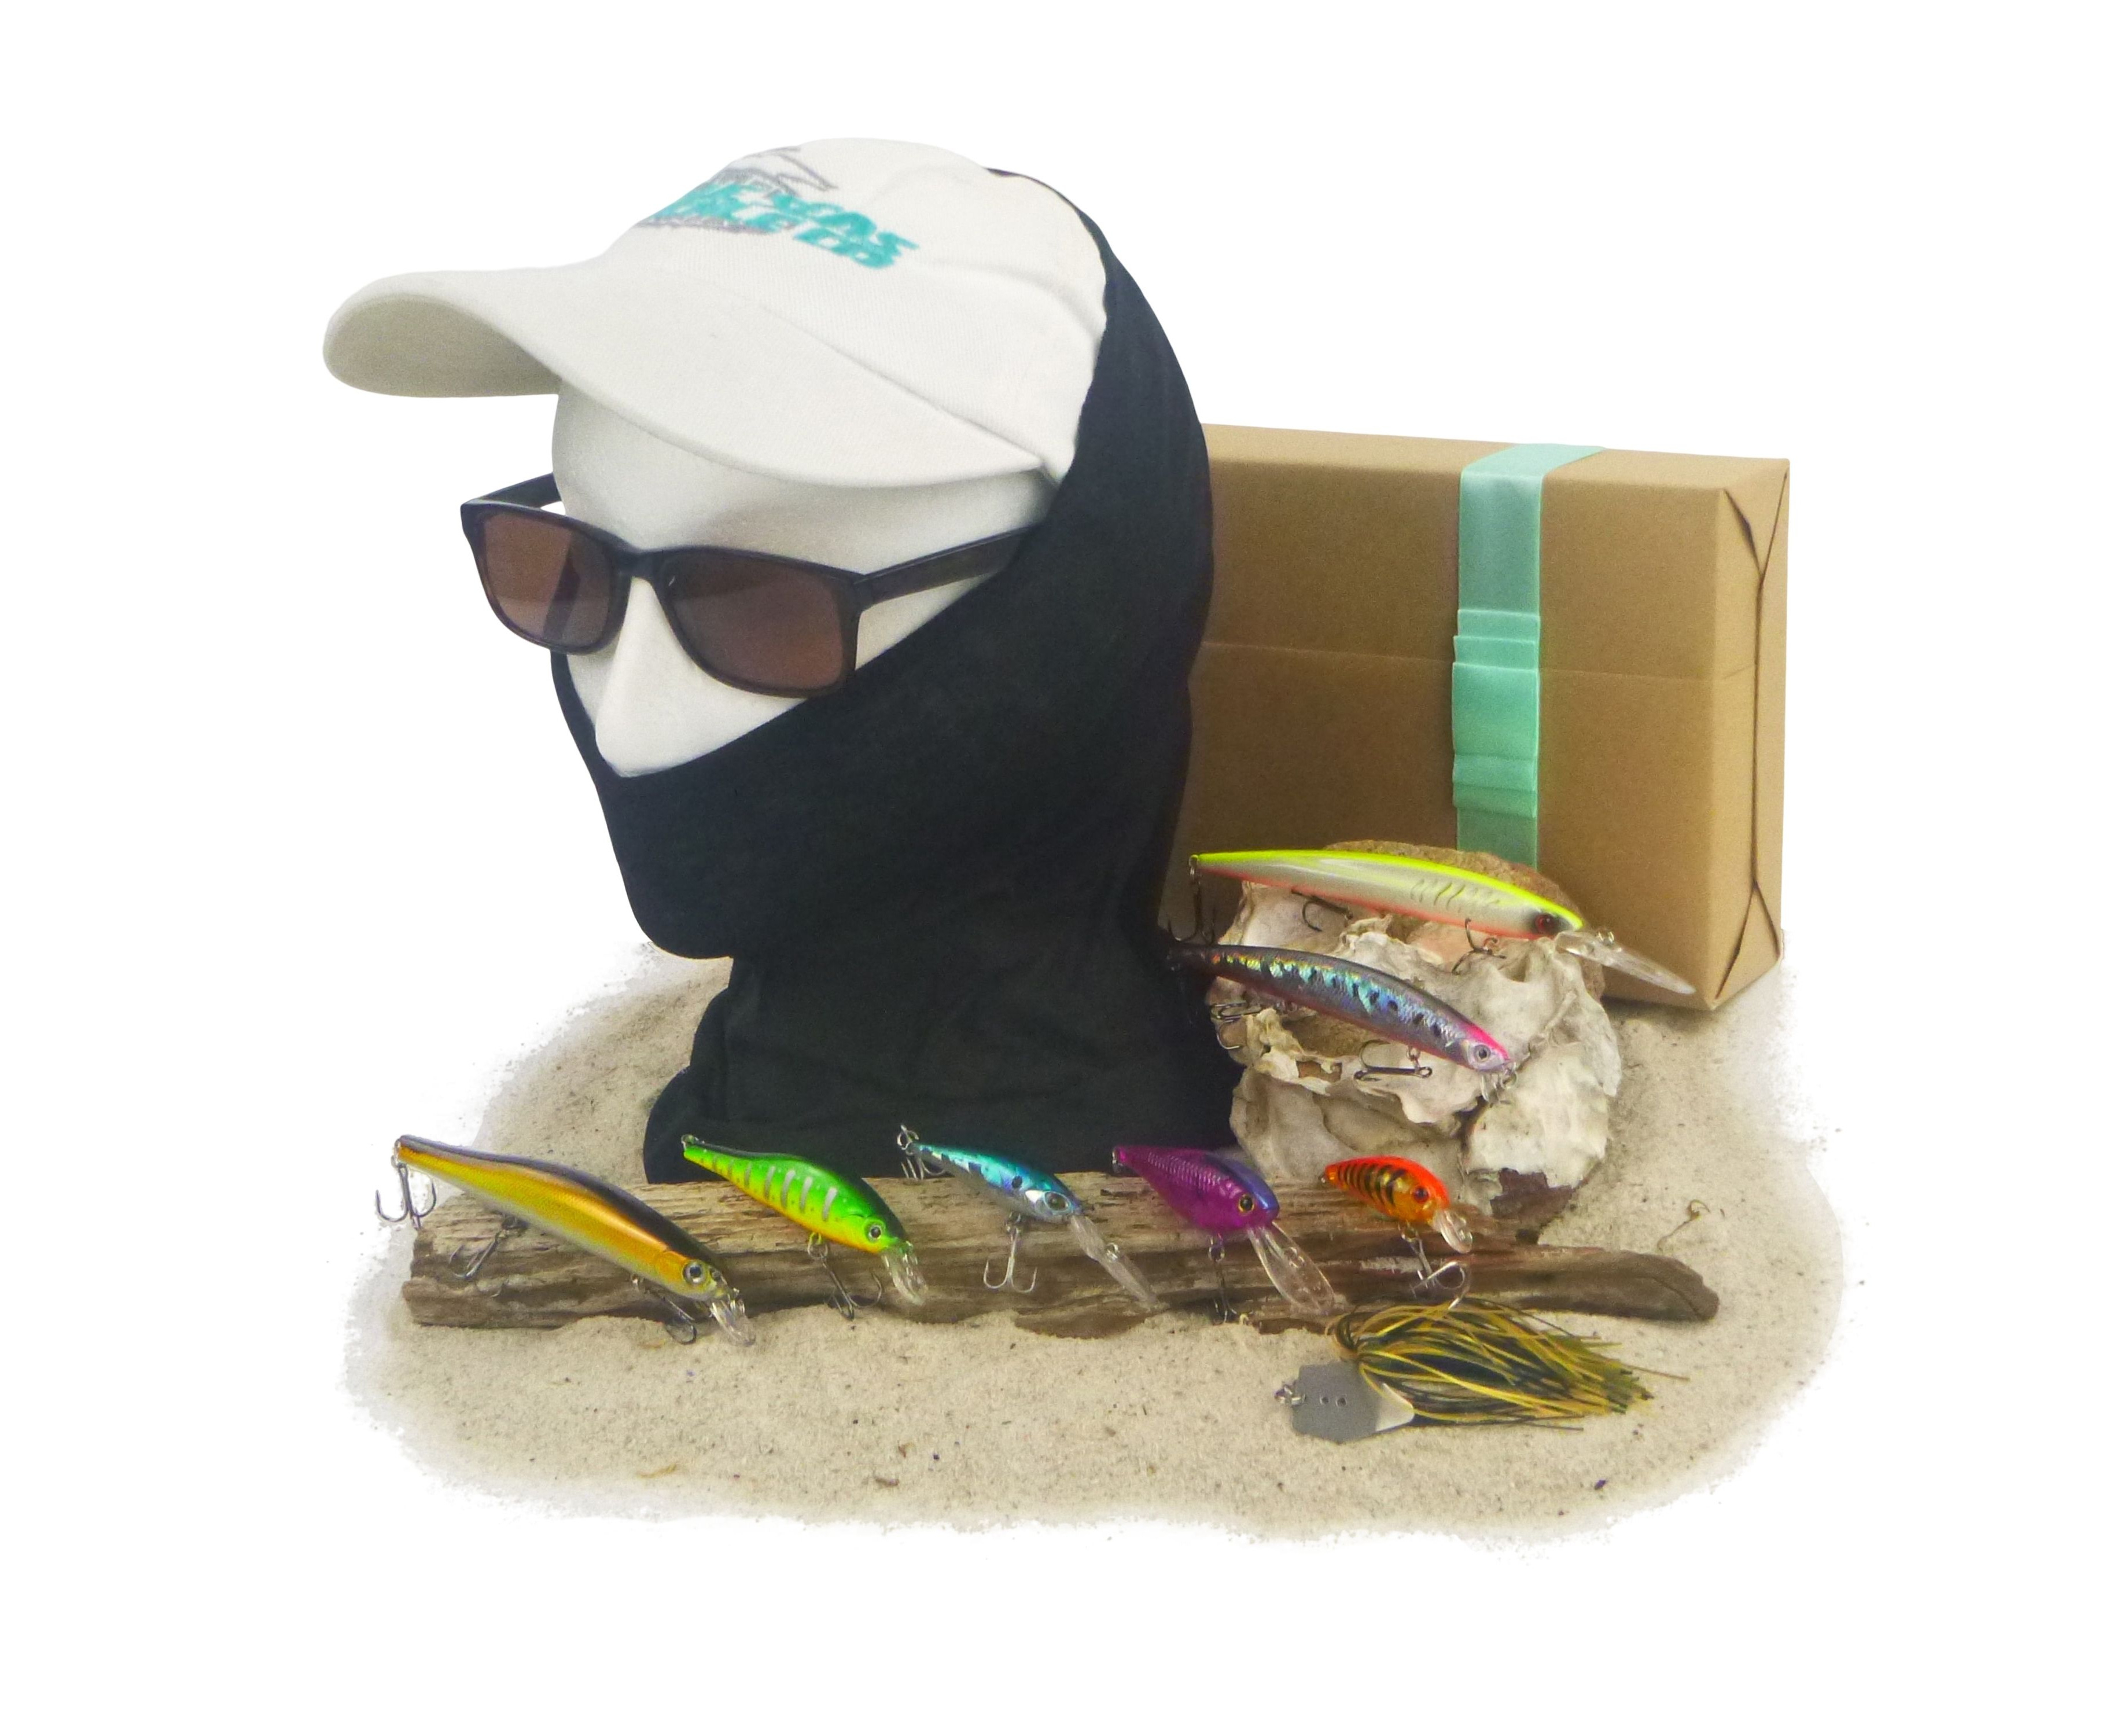 The Diving Lure Fishing Gift Pack